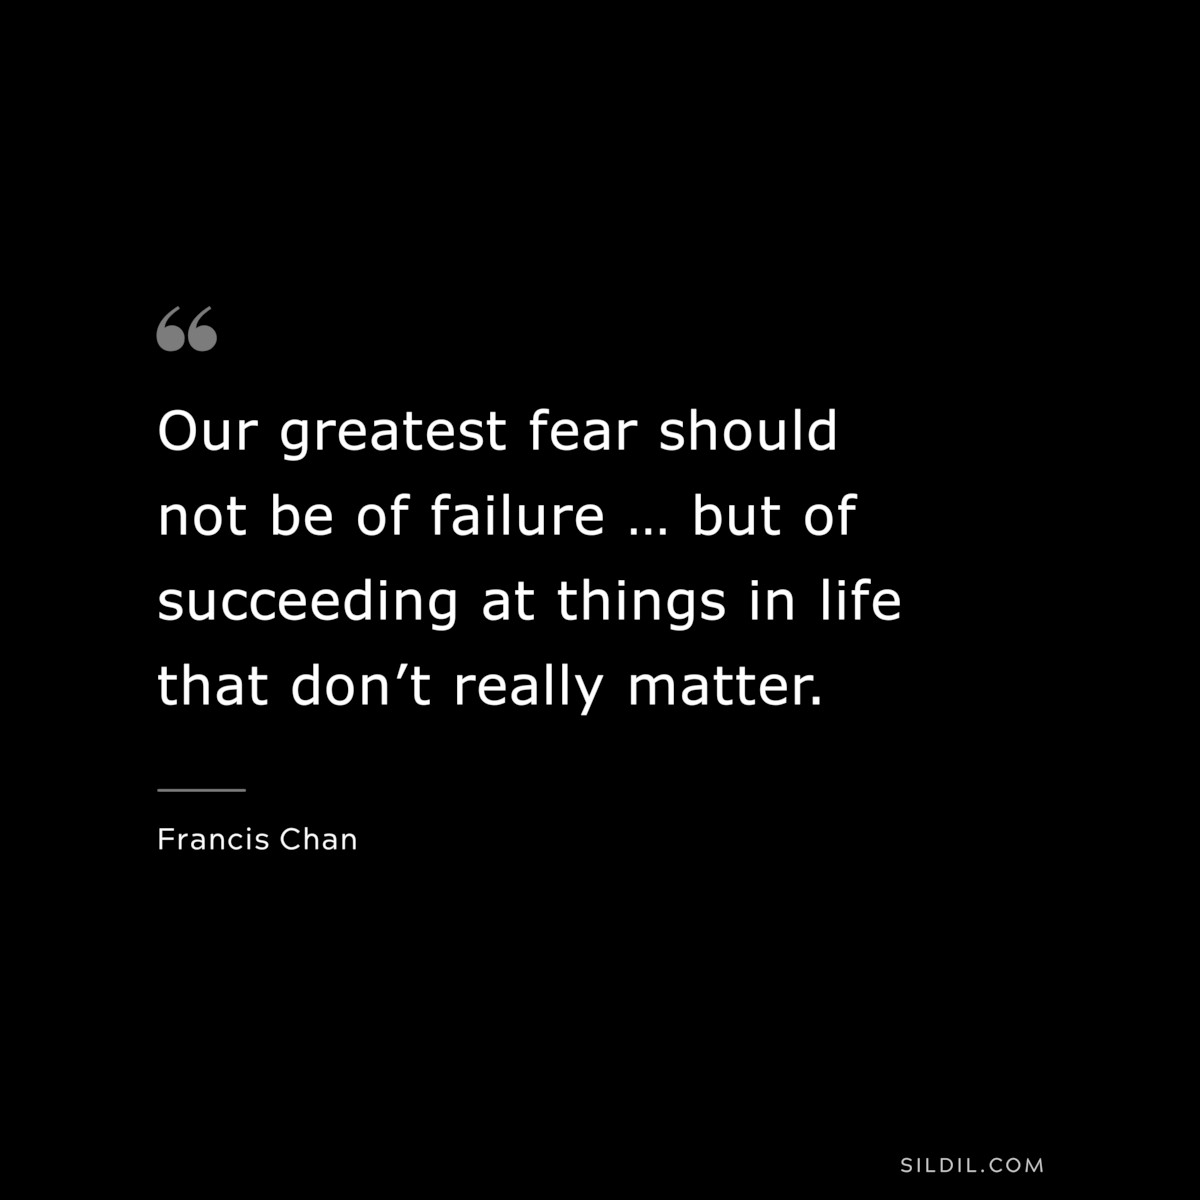 Our greatest fear should not be of failure … but of succeeding at things in life that don’t really matter. ― Francis Chan